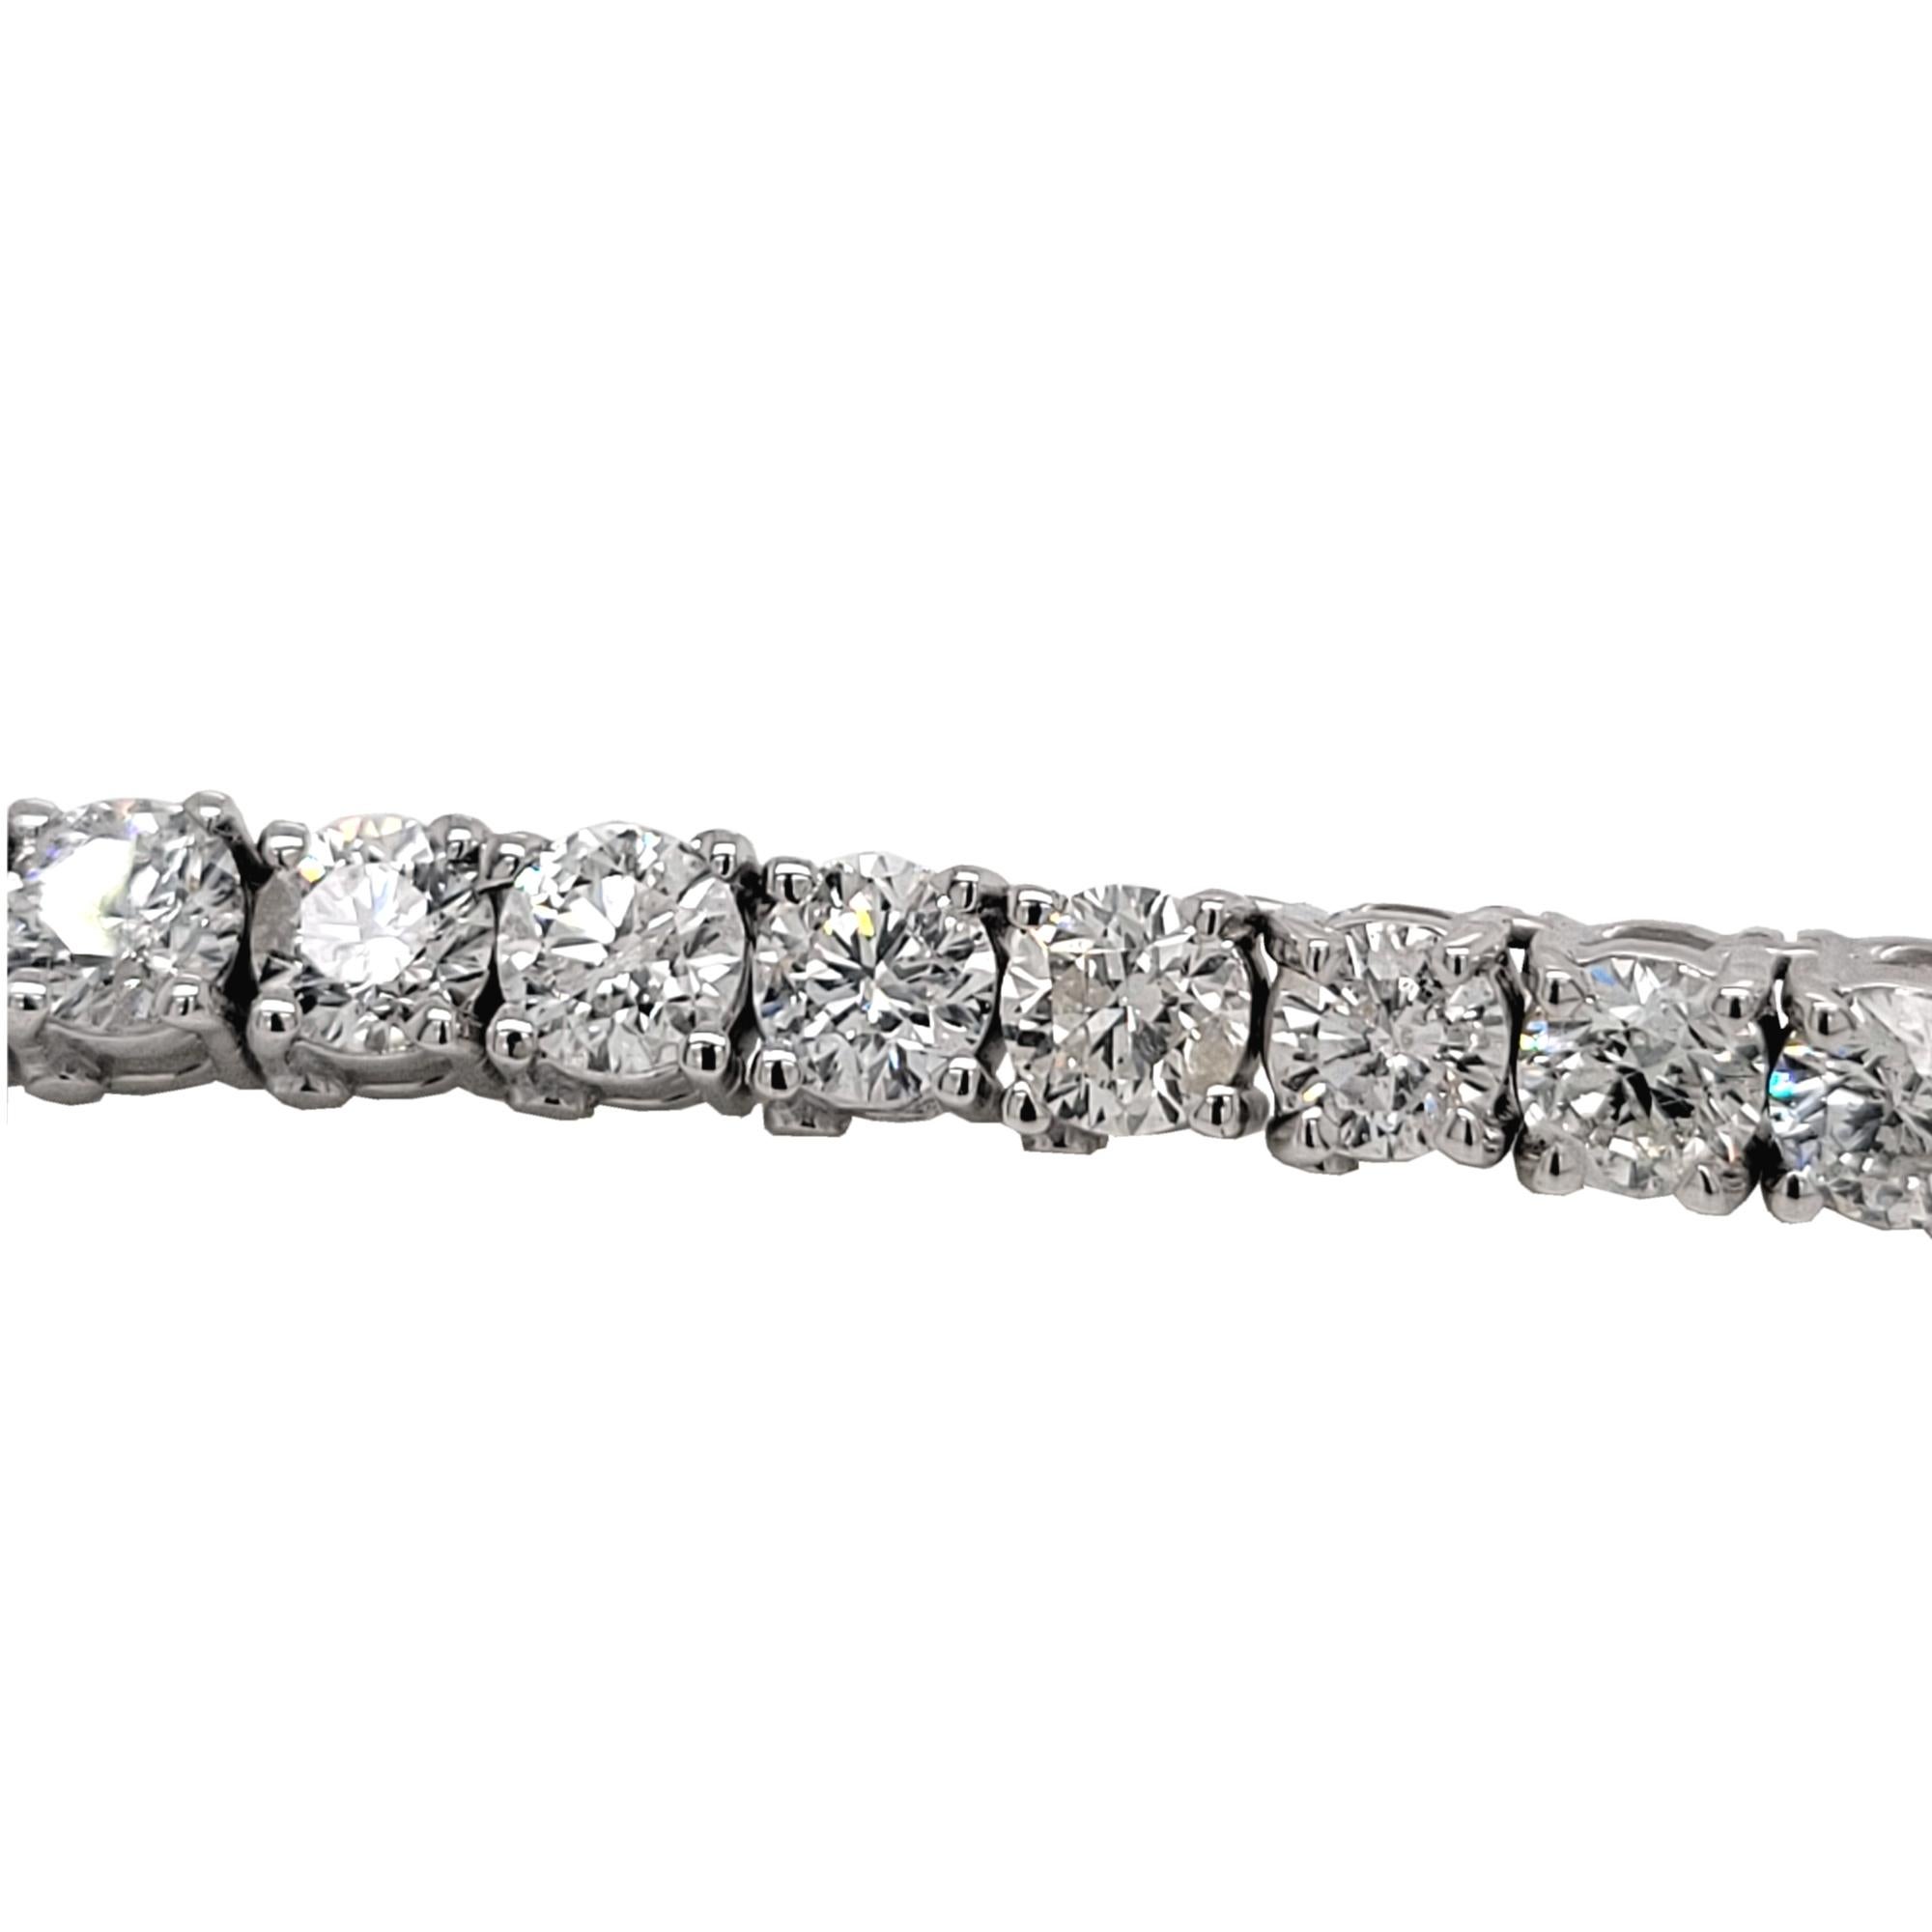 This Diamond Tennis Necklace consists of 141 Links 4 Prong Set 4 mm Round Brilliant diamonds set in 14K Gold. 
Length is 24 Inches.  
Total Weight of diamonds: 38.55 Ct 
Total Weight of bracelet: 51.6 gr